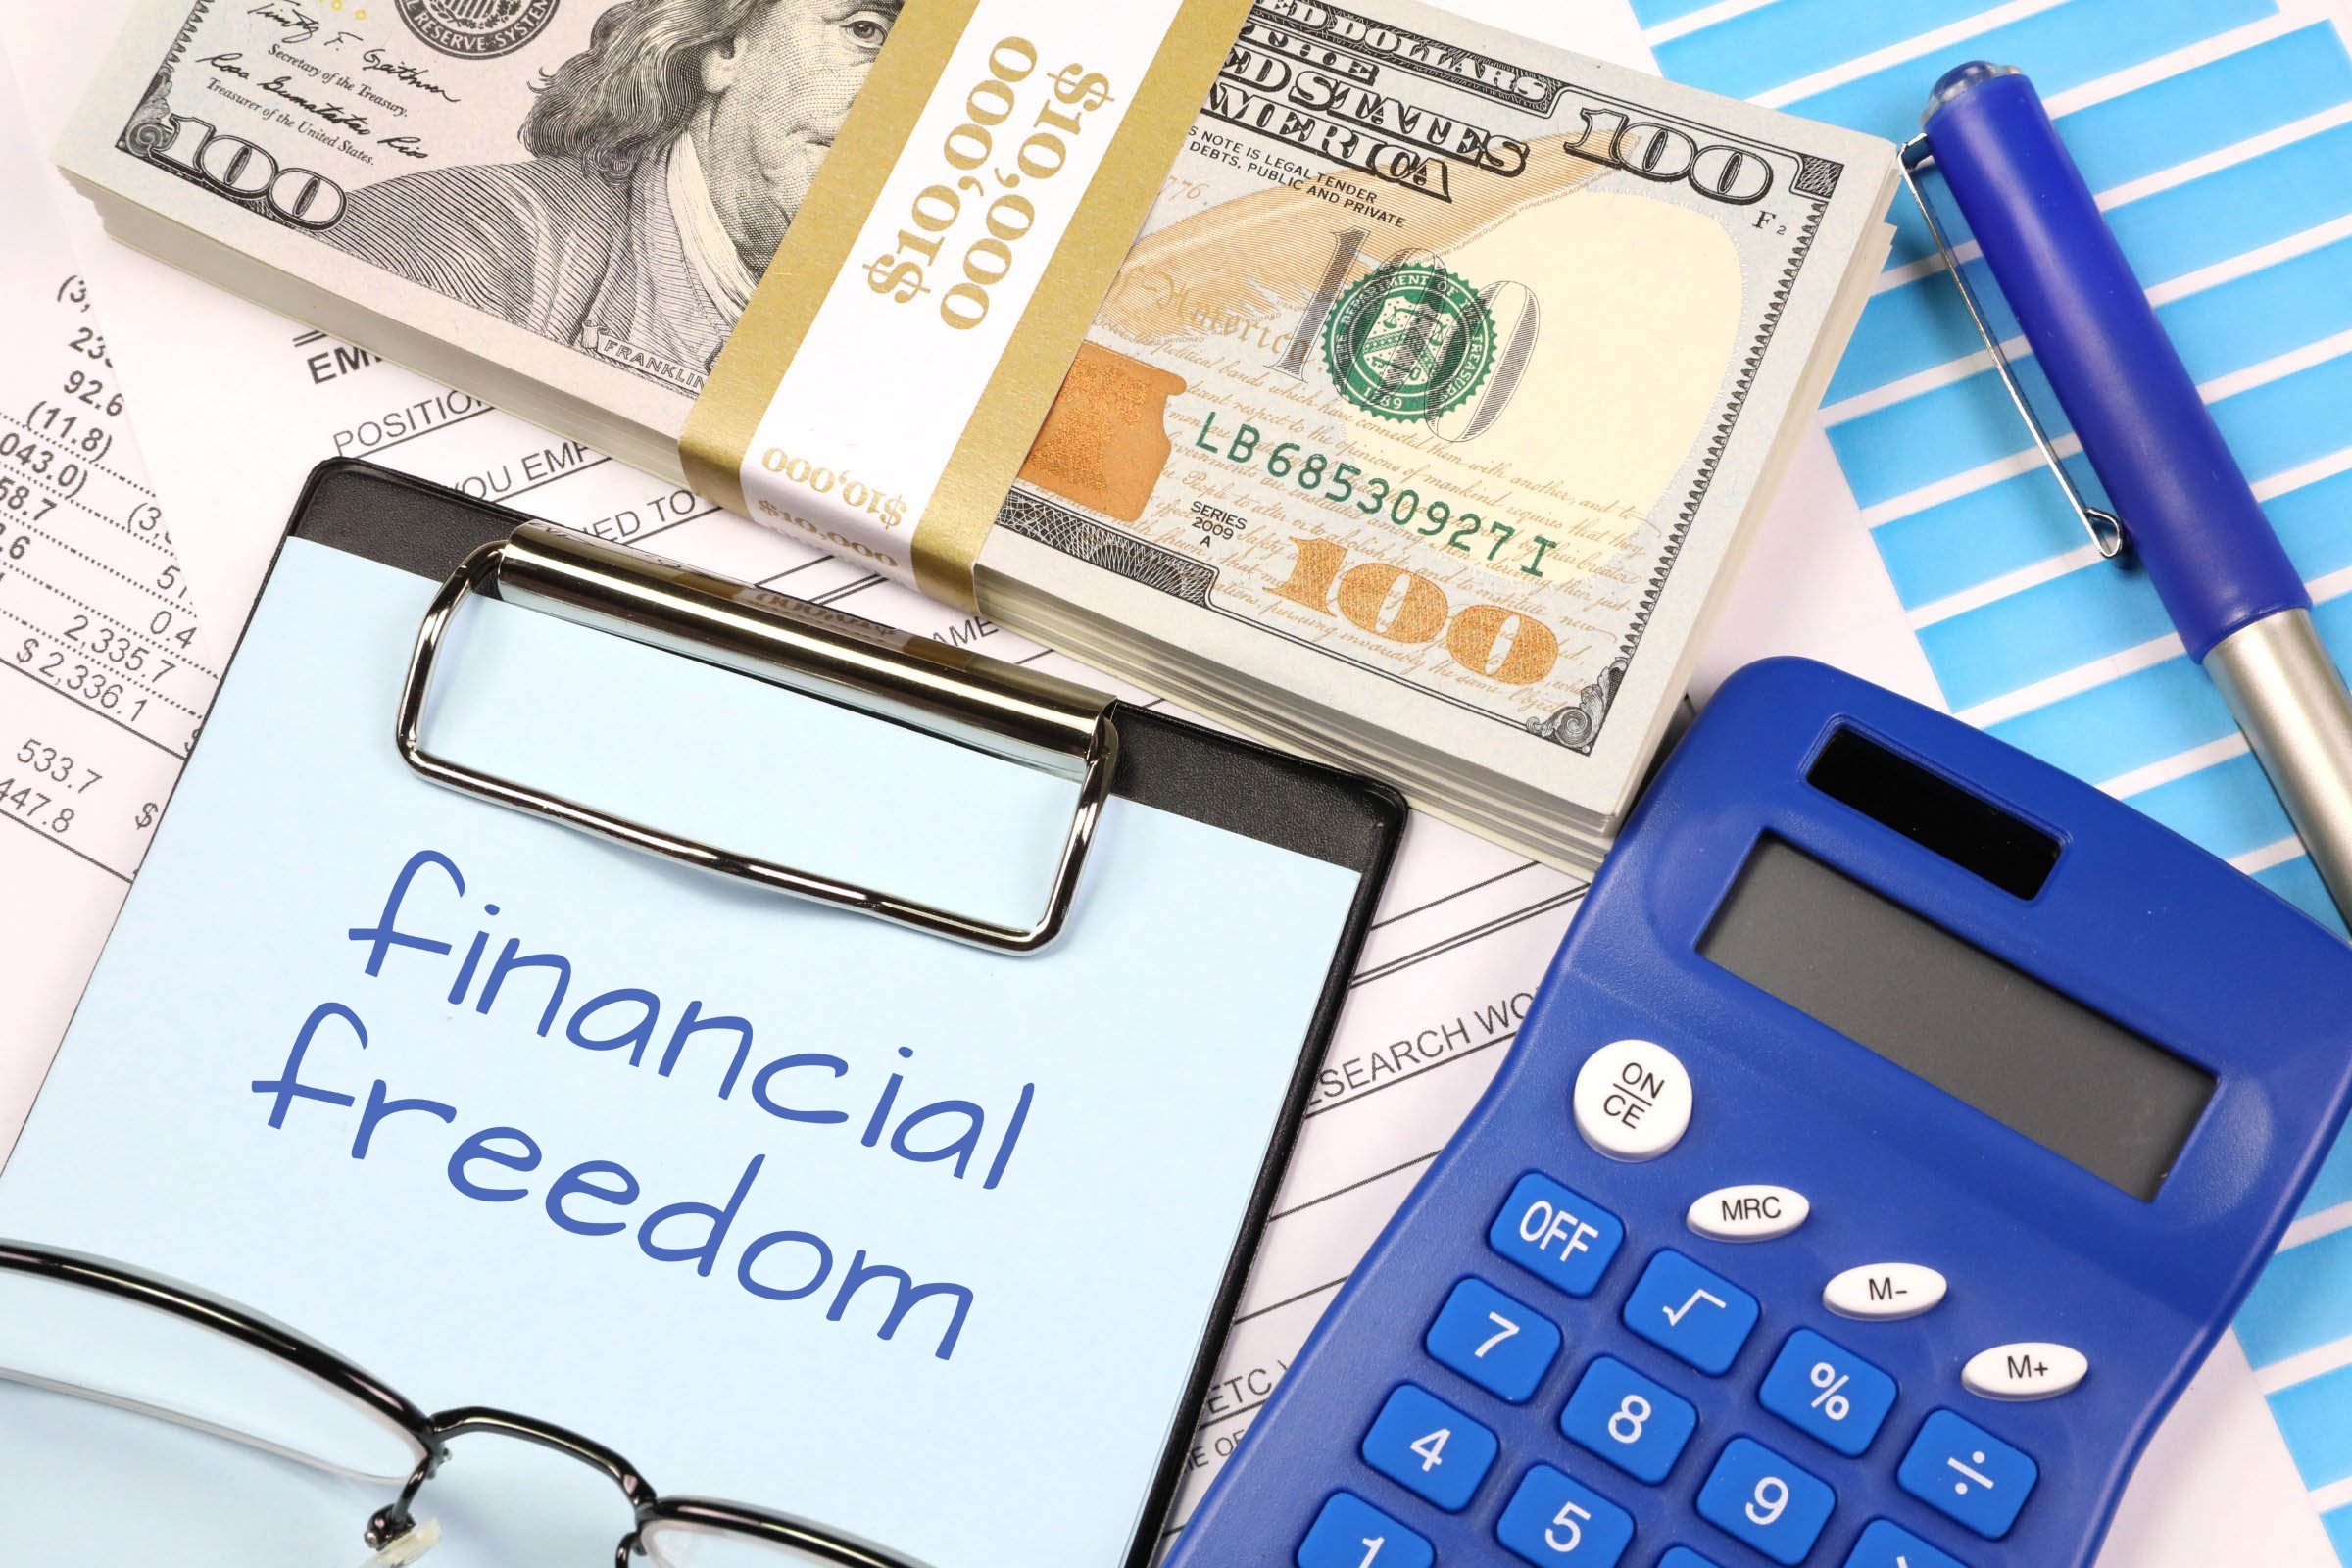 The 5 Simple Steps to Financial Freedom